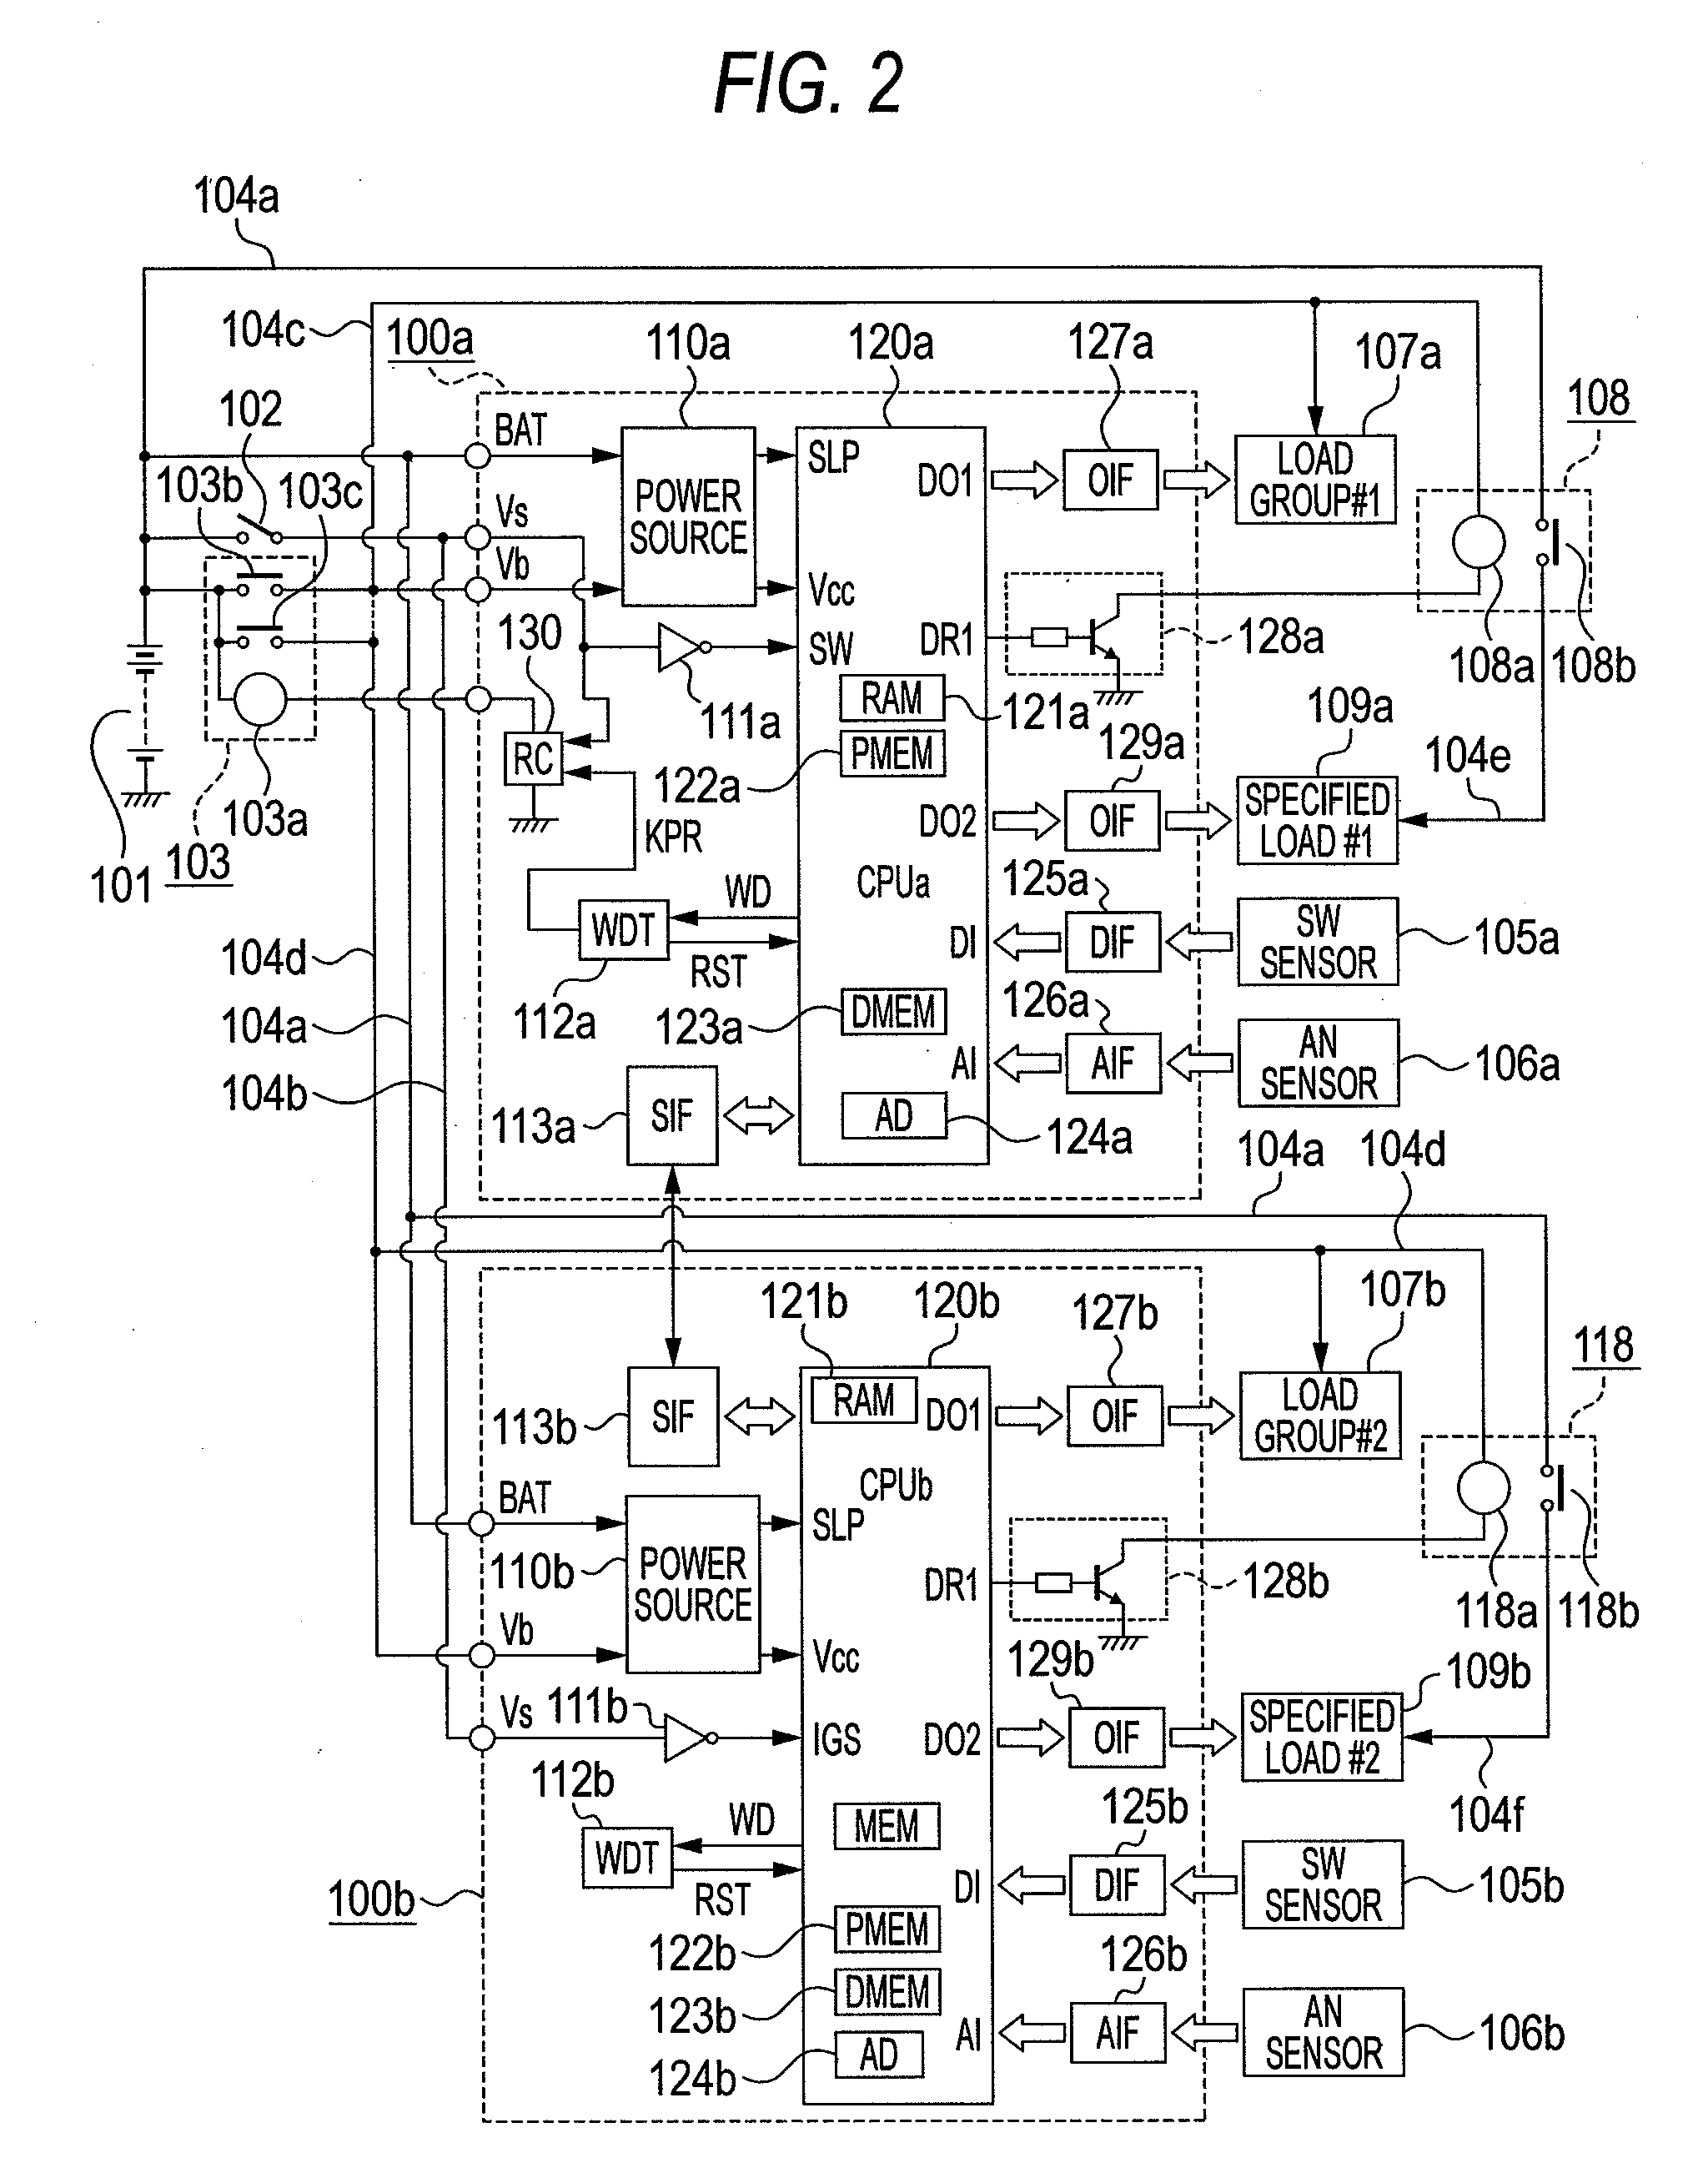 Power feed control circuit for on-vehicle electronic control apparatuses